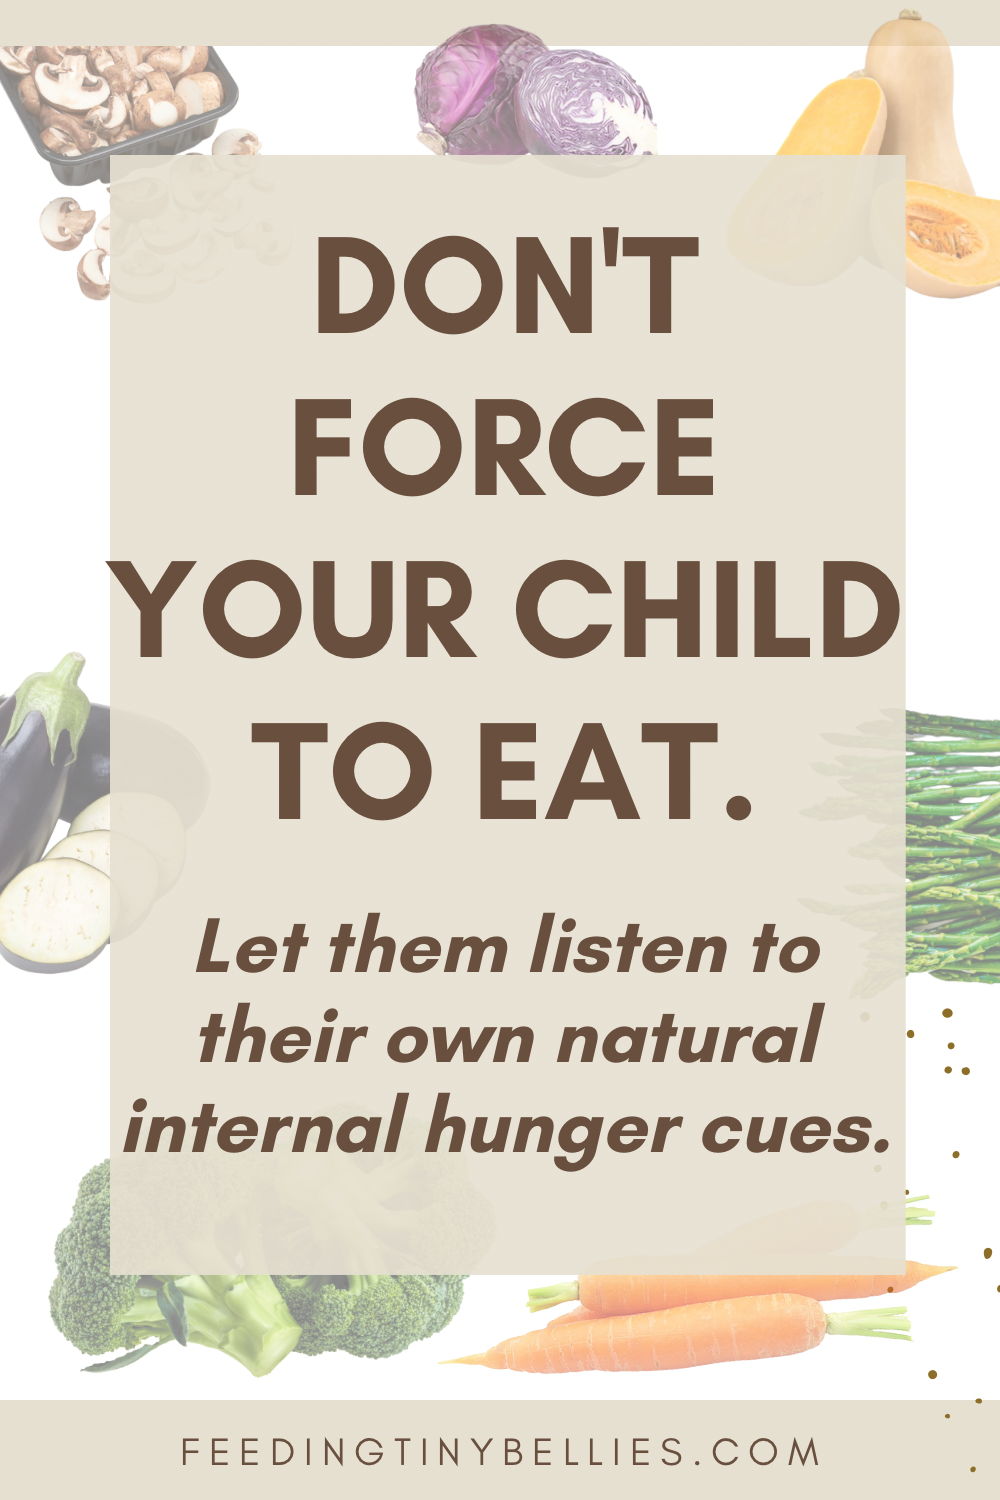 Don't force your child to eat. Let them listen to their own natural internal hunger cues.